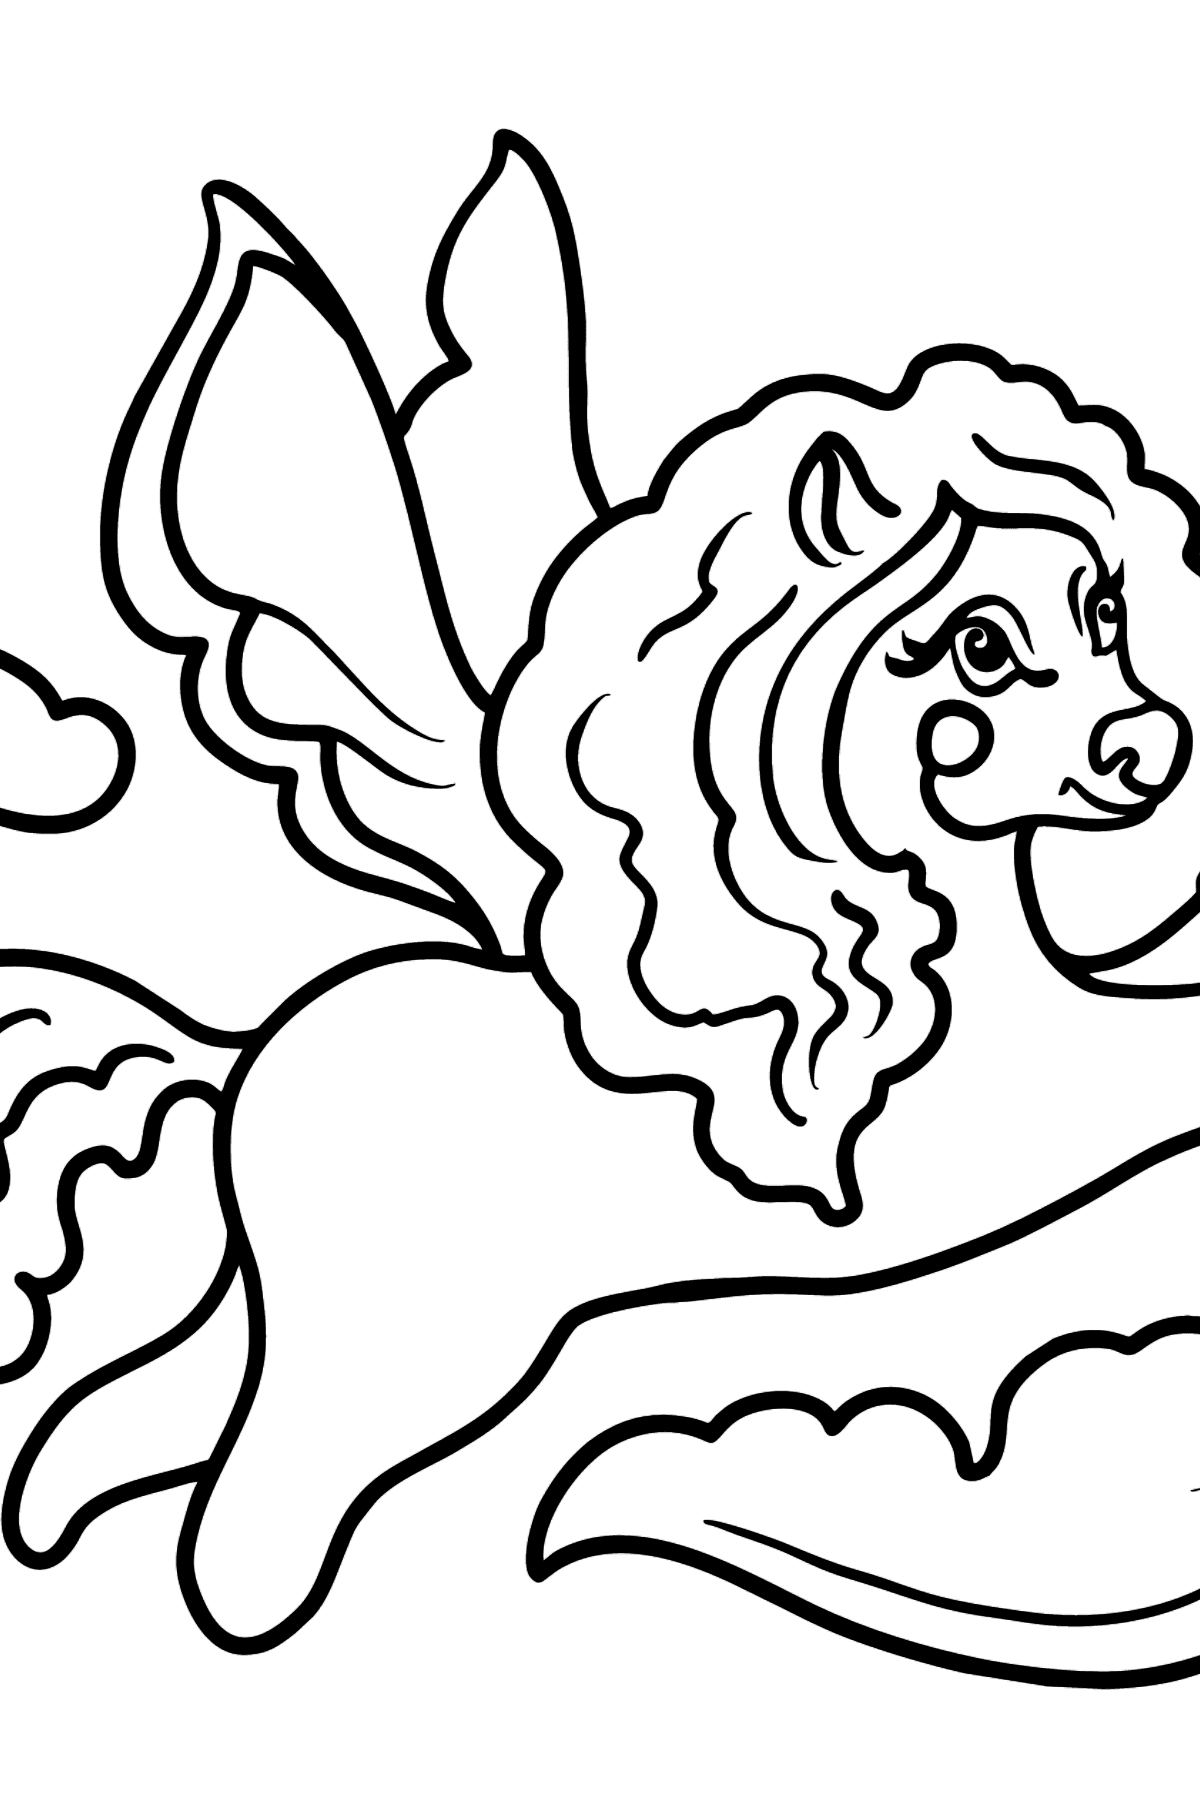 Pony Flying coloring page - Coloring Pages for Kids